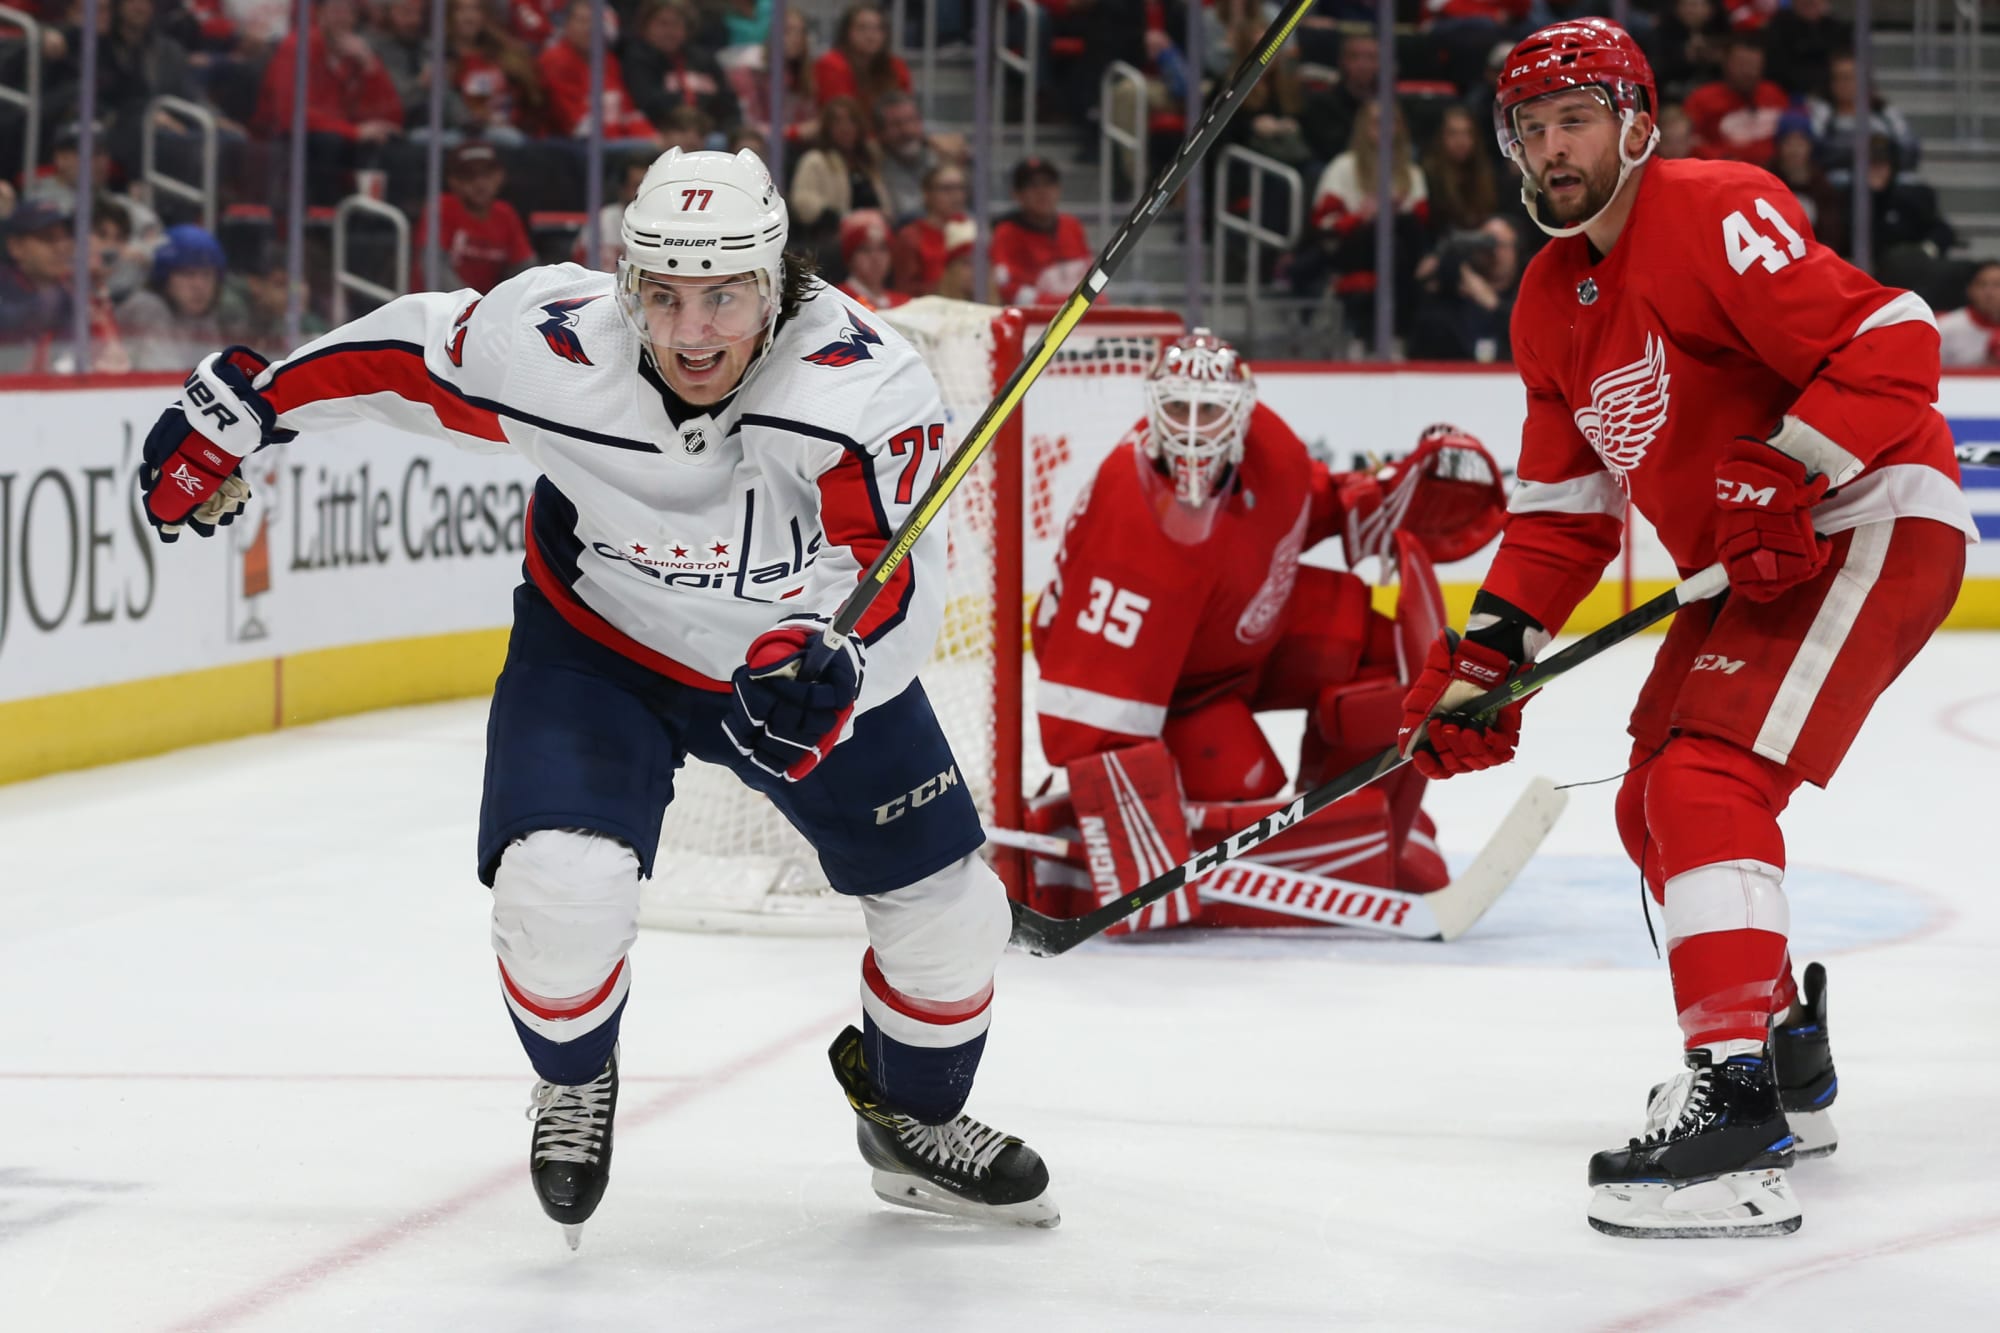 Capitals vs Red Wings: Date, Time, Streaming and More